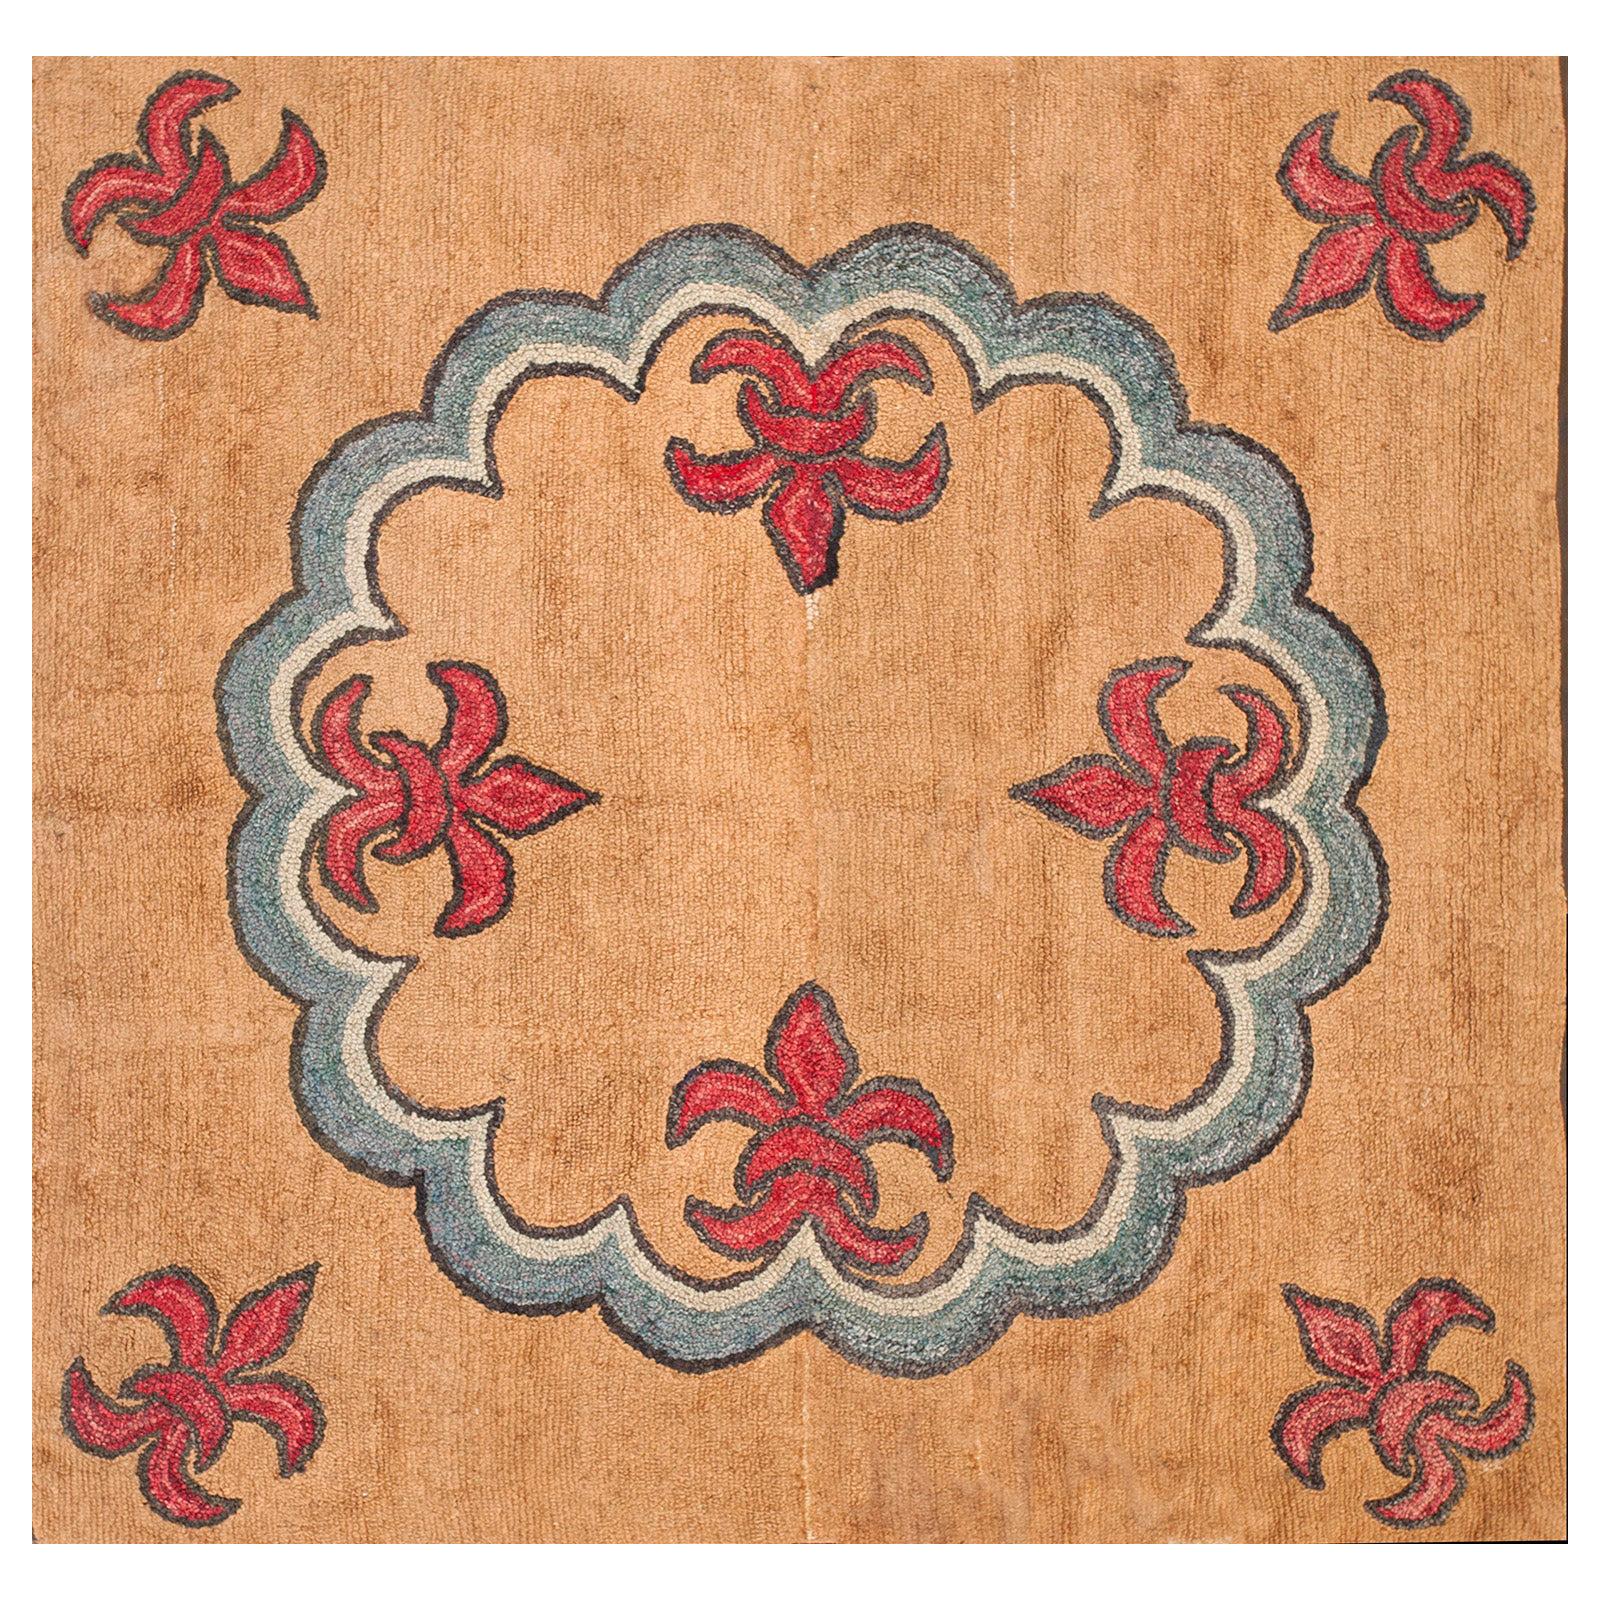 Antique American Hooked Rug 4' 10" x 4' 10"  For Sale